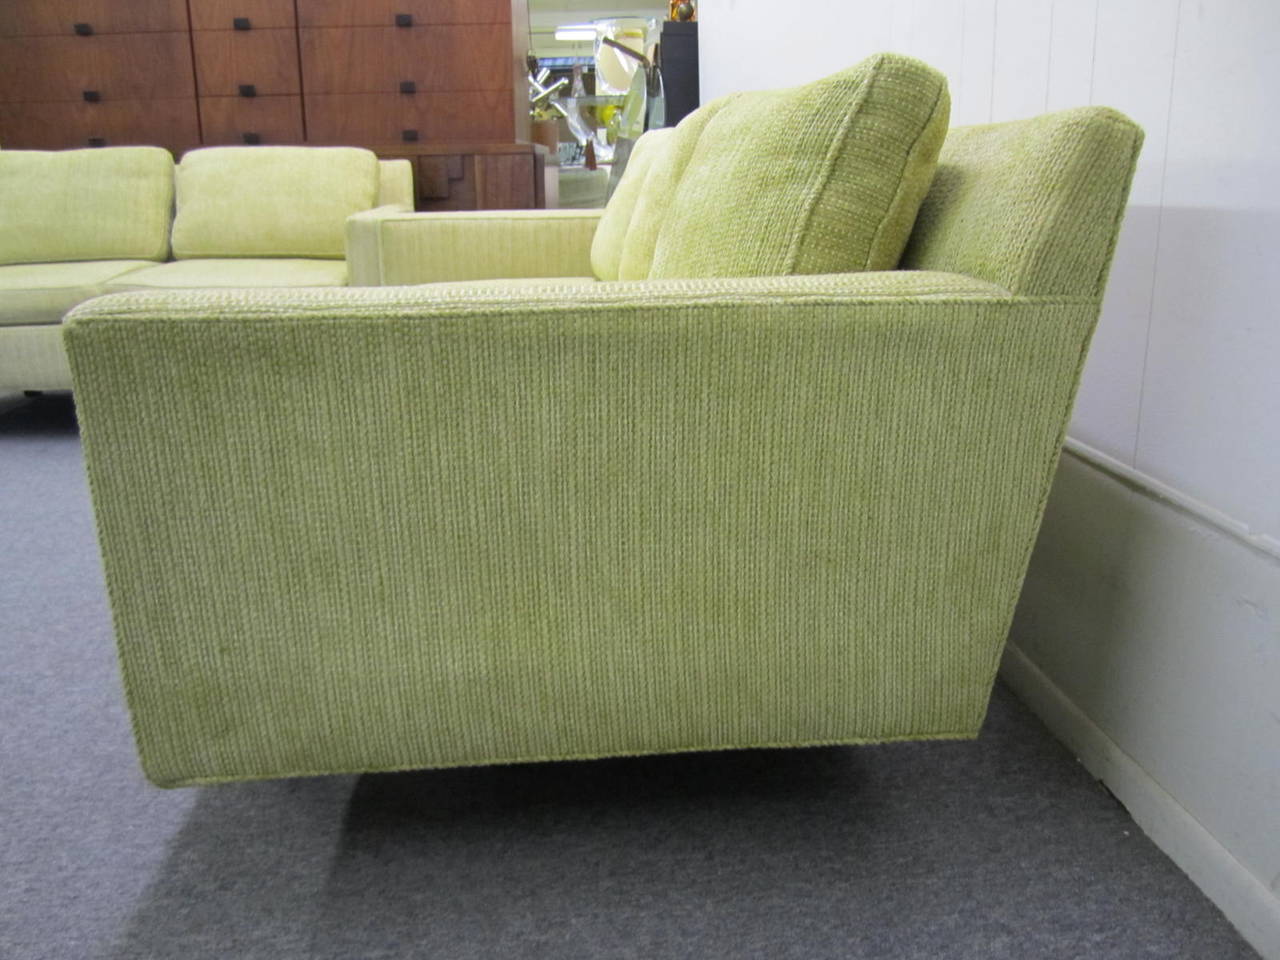 Stunning Signed Dunbar Three Seater Sofa Mid-Century Modern In Good Condition For Sale In Pemberton, NJ